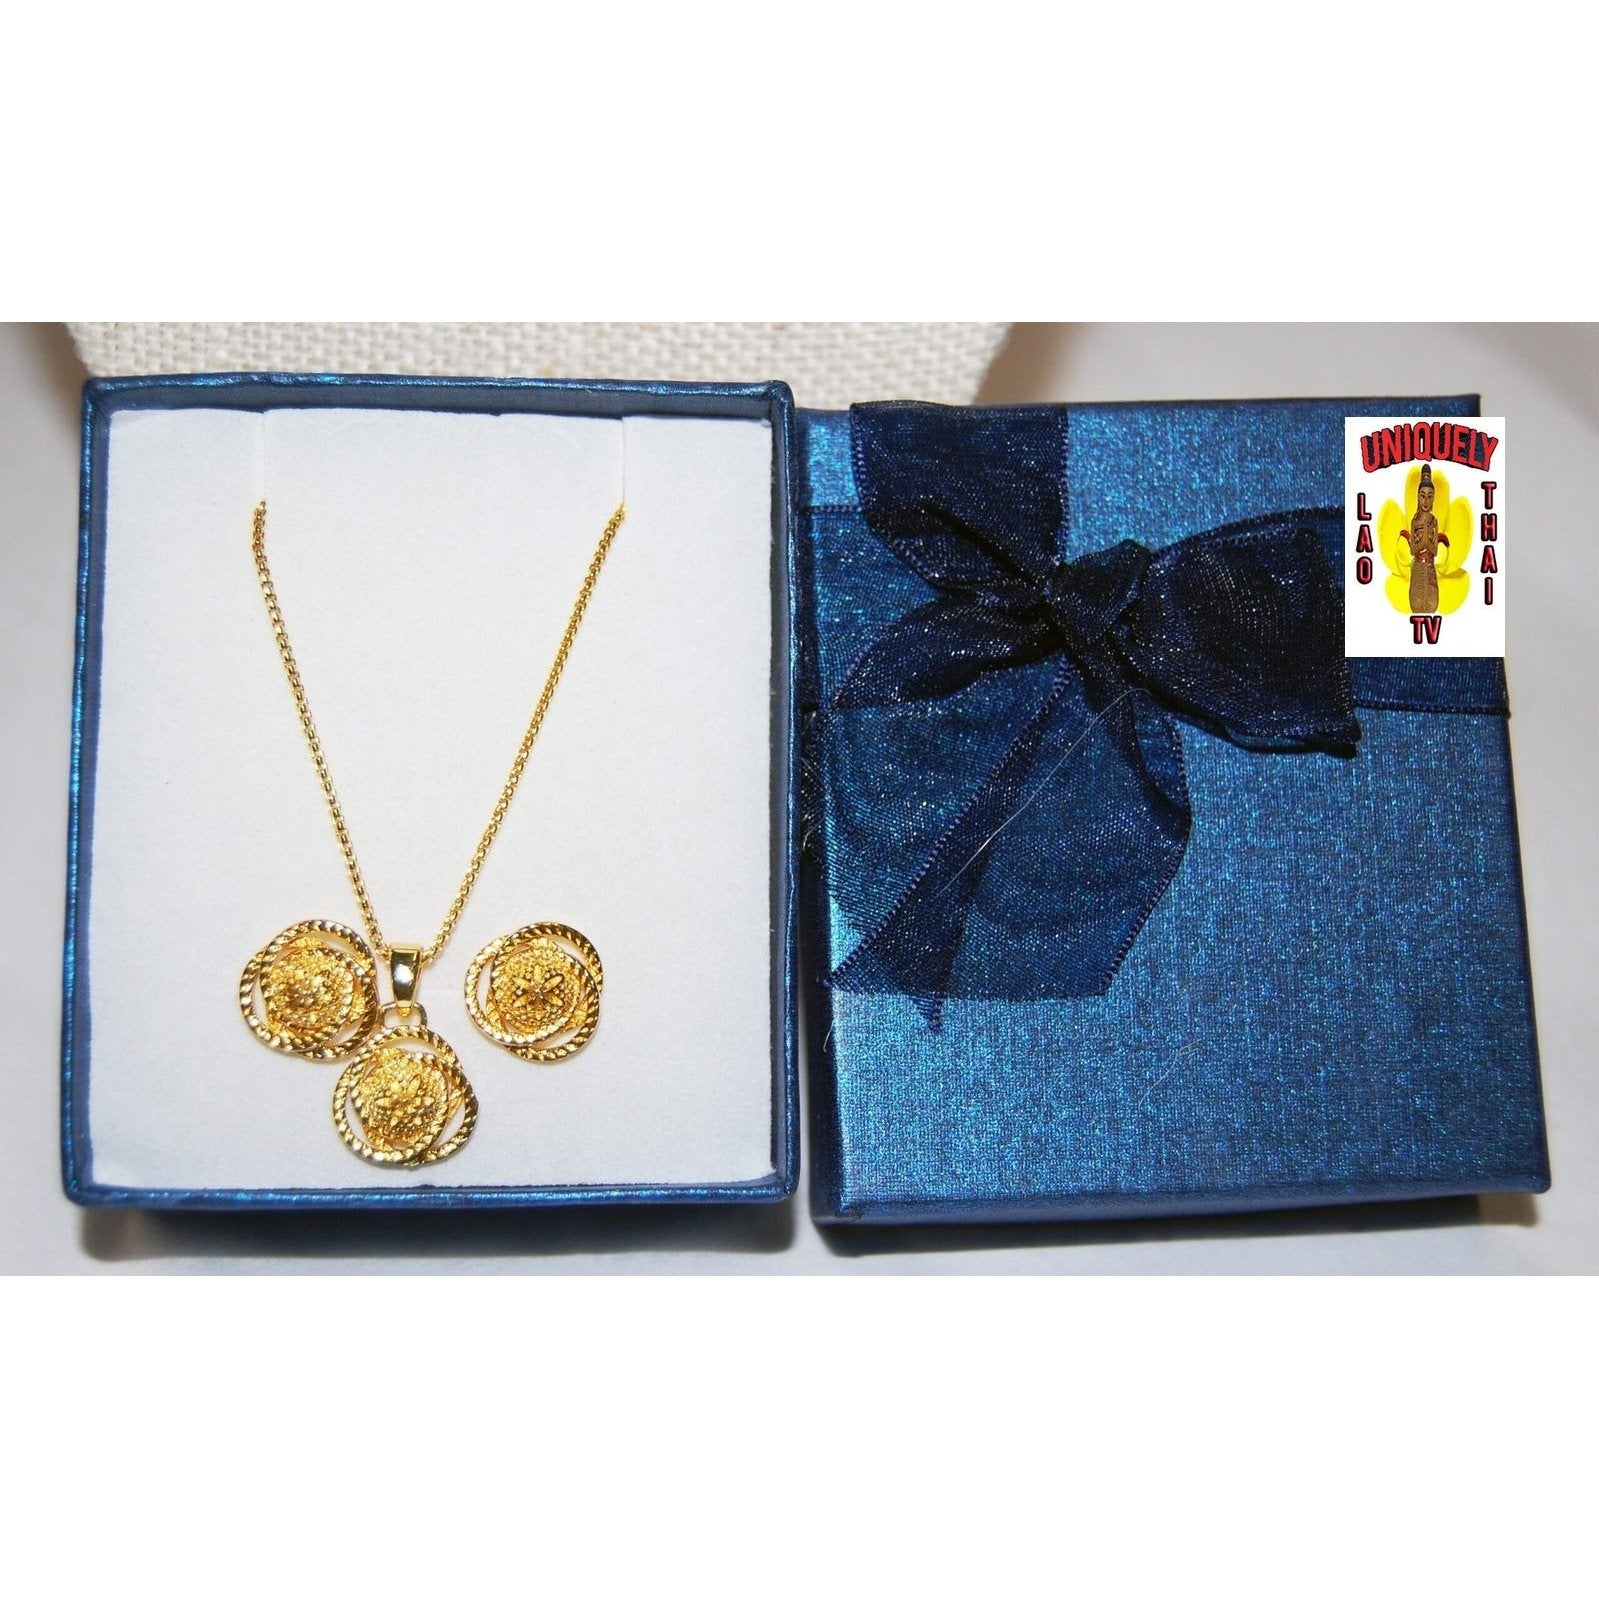 Buy Golden Treasure Classic White and Golden Pearl Gold Plated Long Necklace  Set for Women with earing at Amazon.in